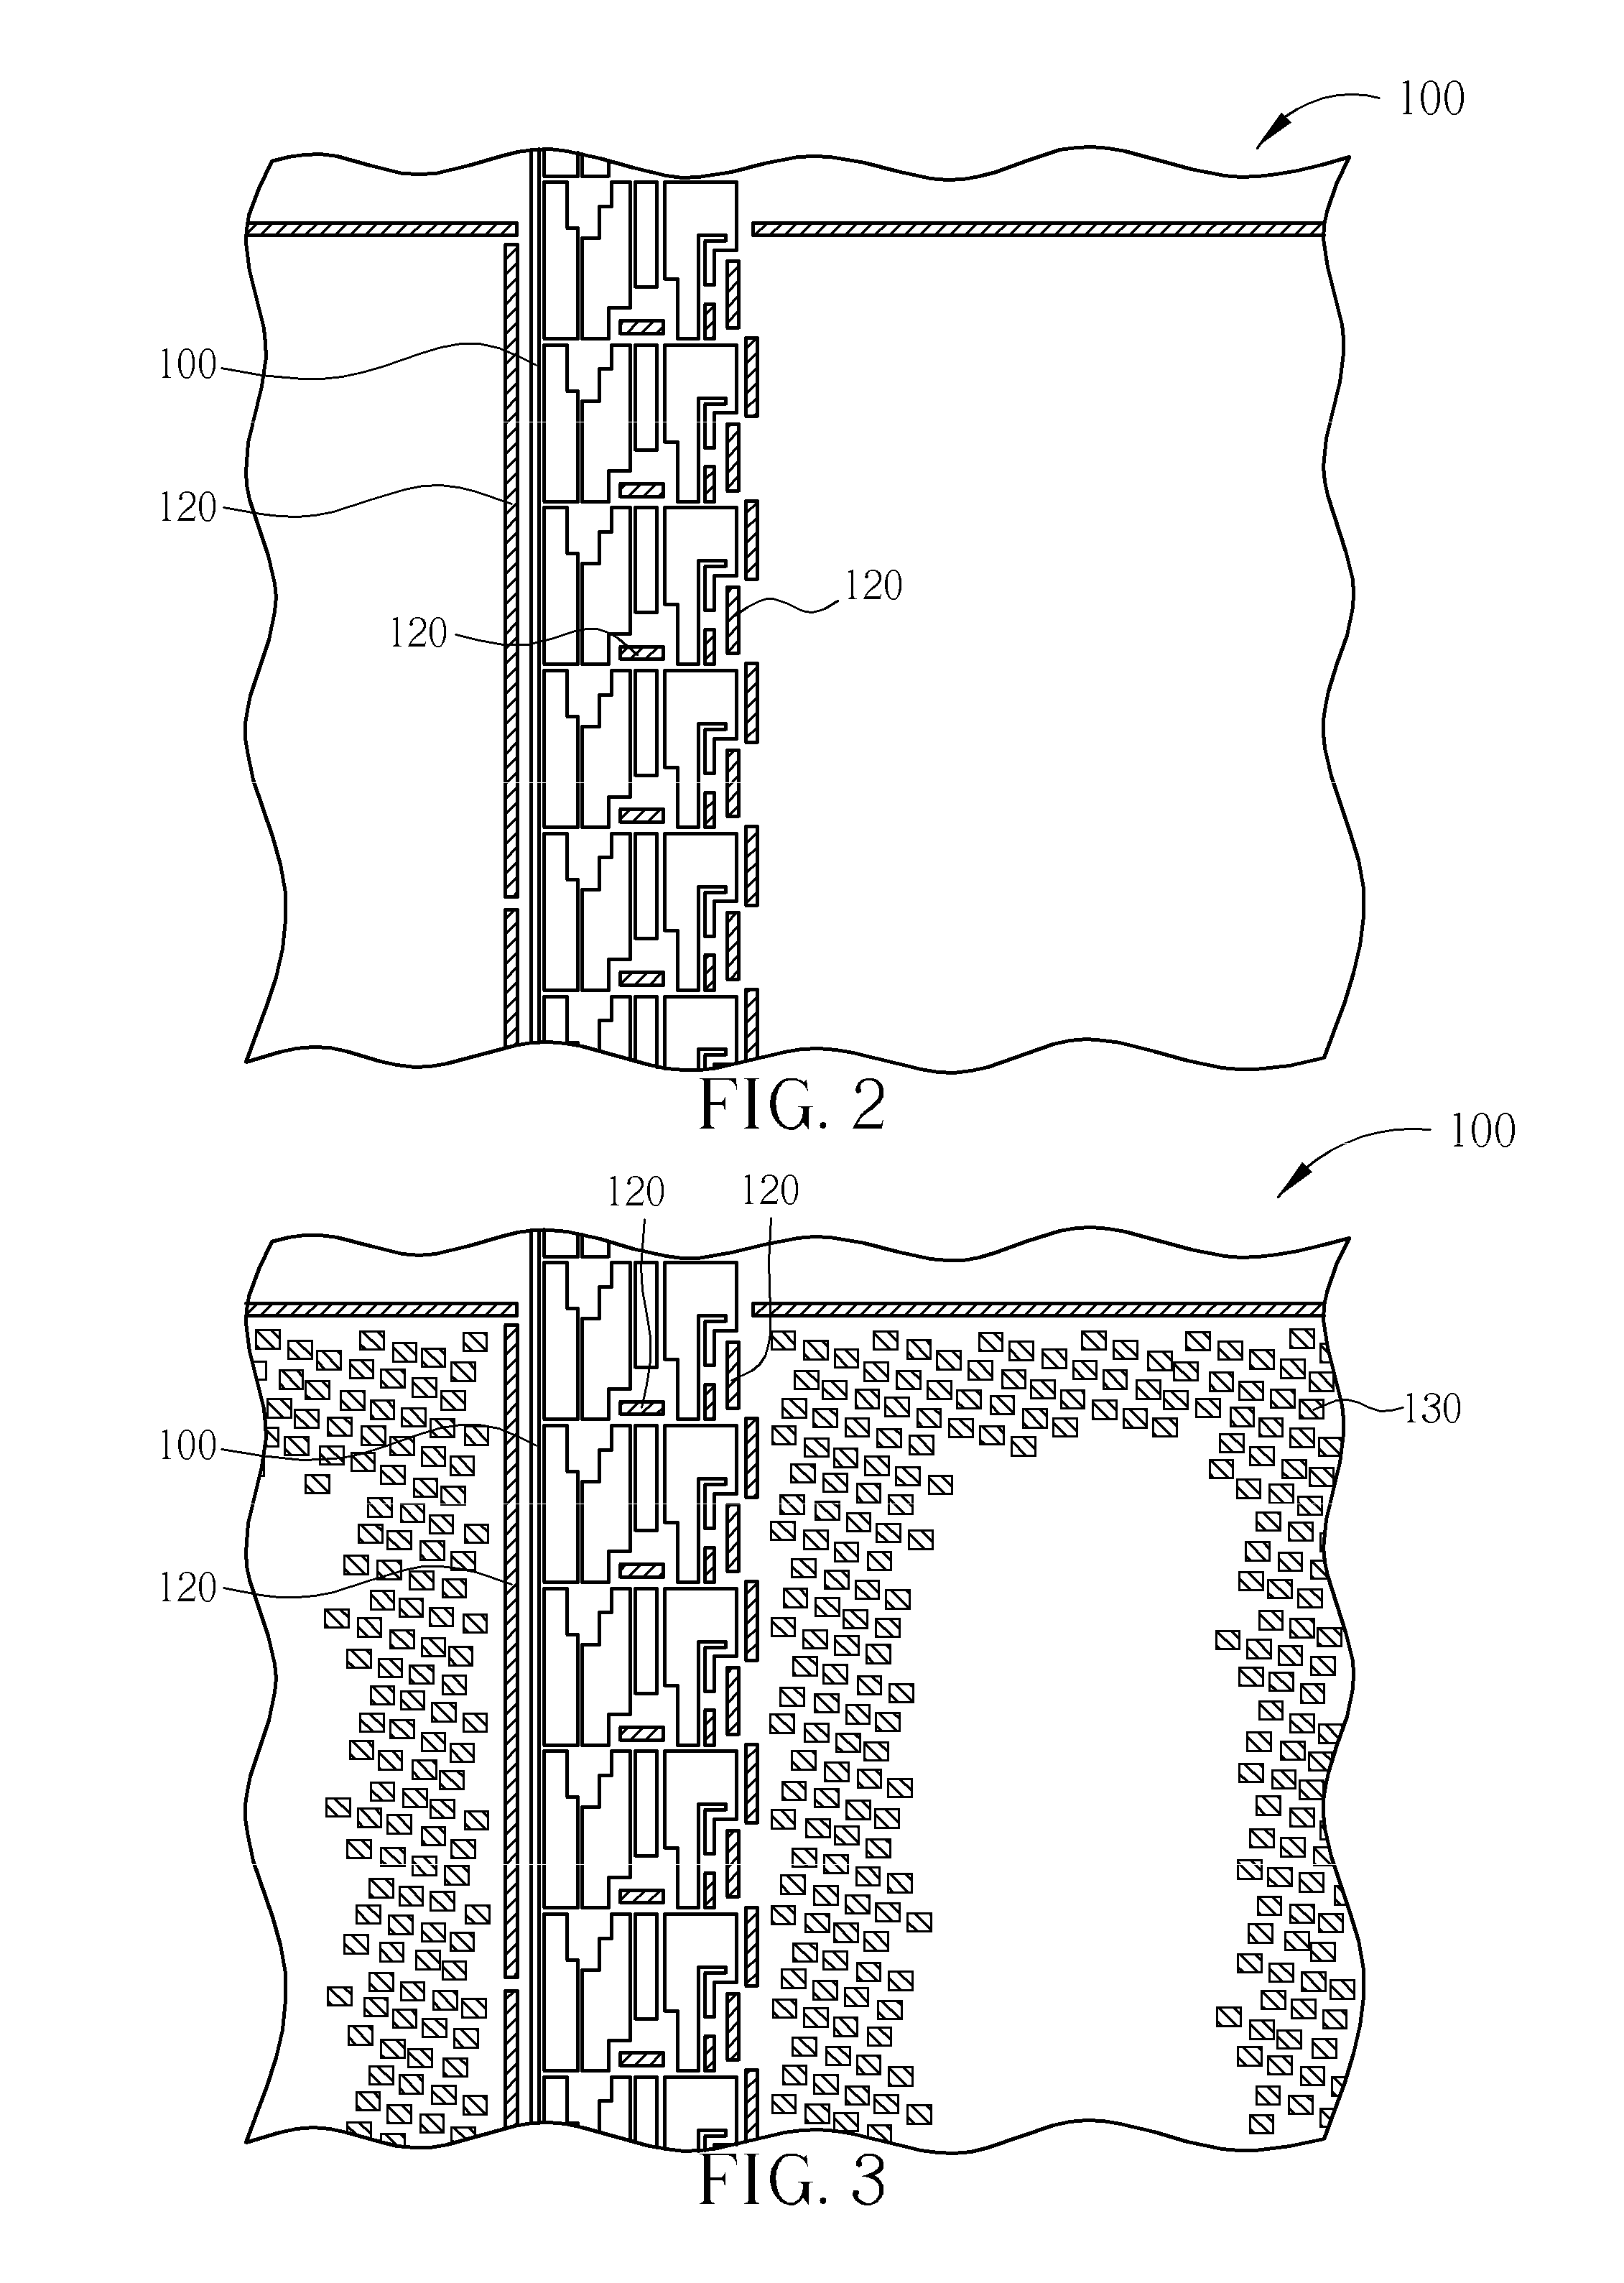 Dummy patterns and method for generating dummy patterns